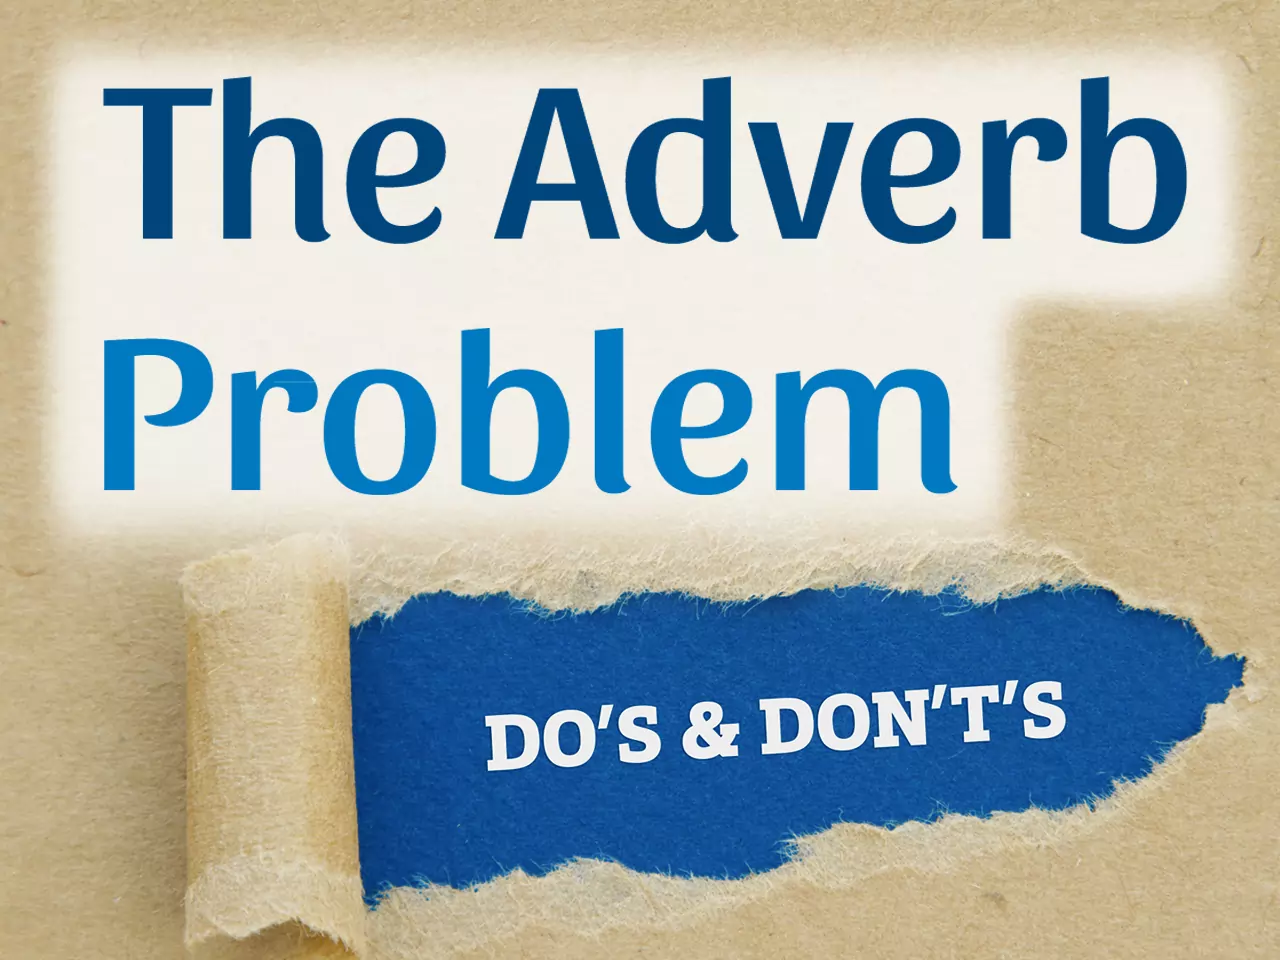 The Adverb Problem and Why Authors Should Care